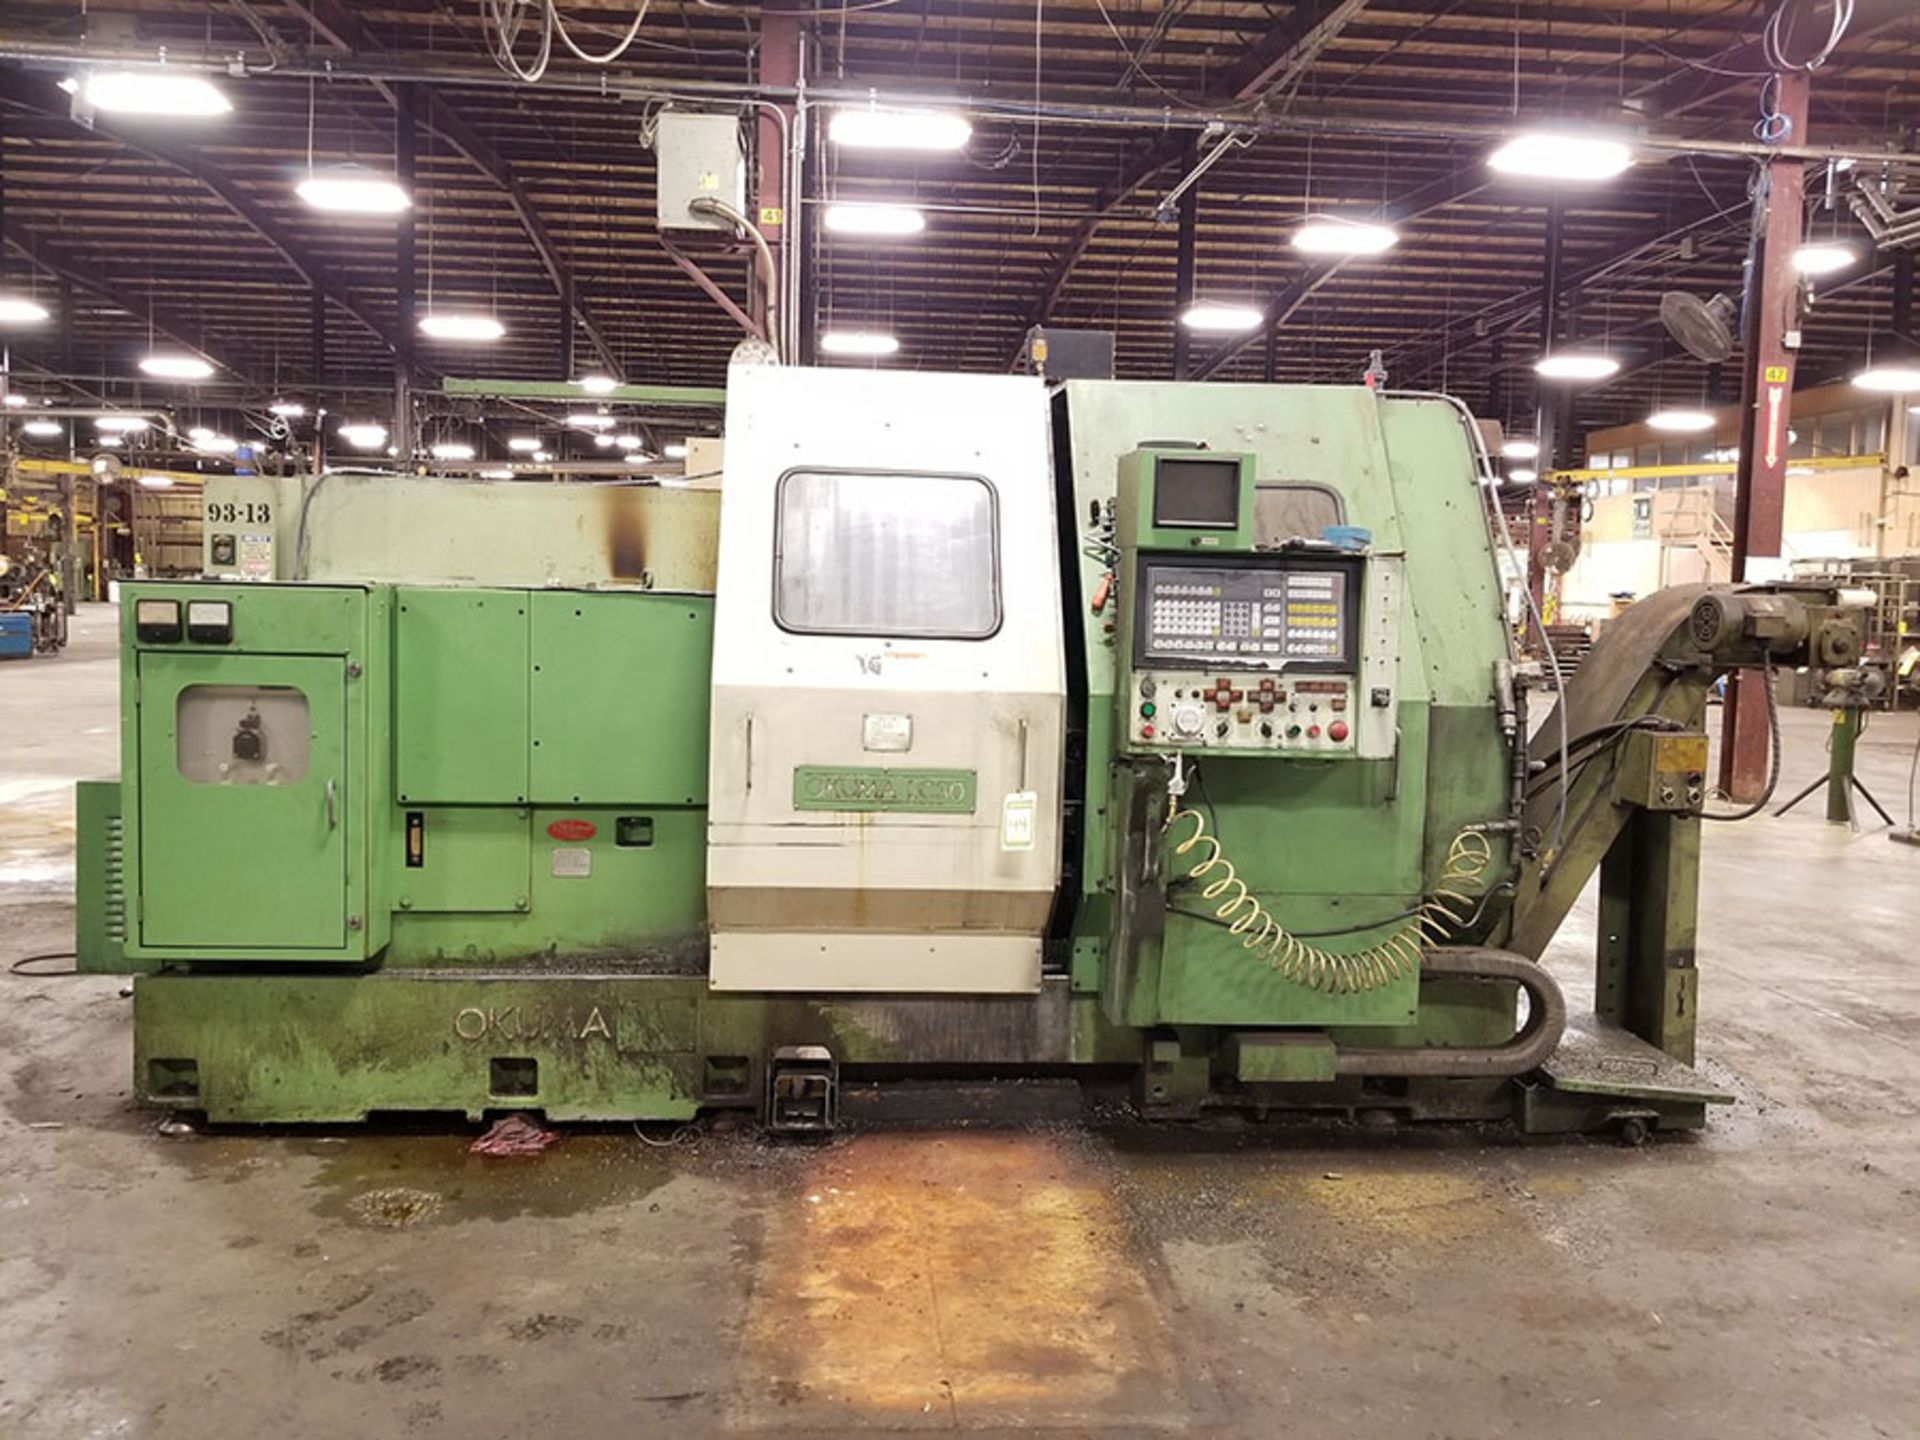 OKUMA LC-30 CNC LATHE, S/N 0319, 8 & 7-TOOL POSITION TURRETS, OUTFEED CHIP CONVEYOR - Image 2 of 16